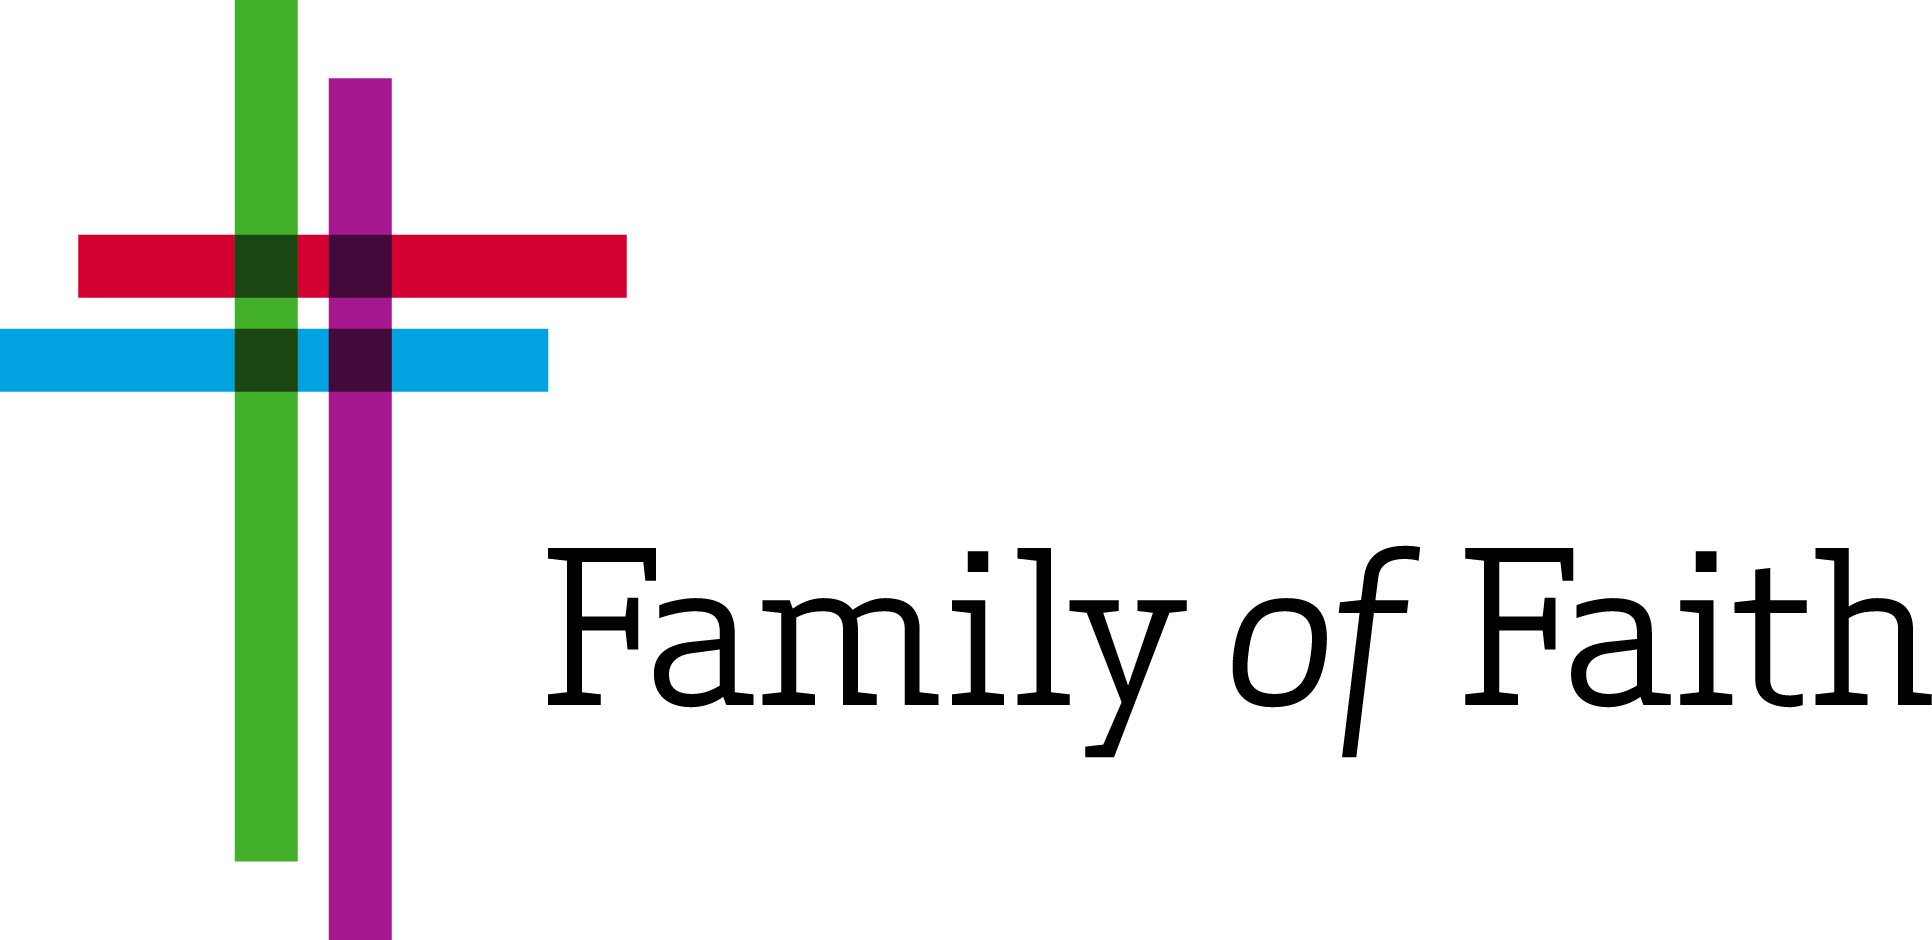 logo has a red cross over a blue cross wit the words "Family of Faith"